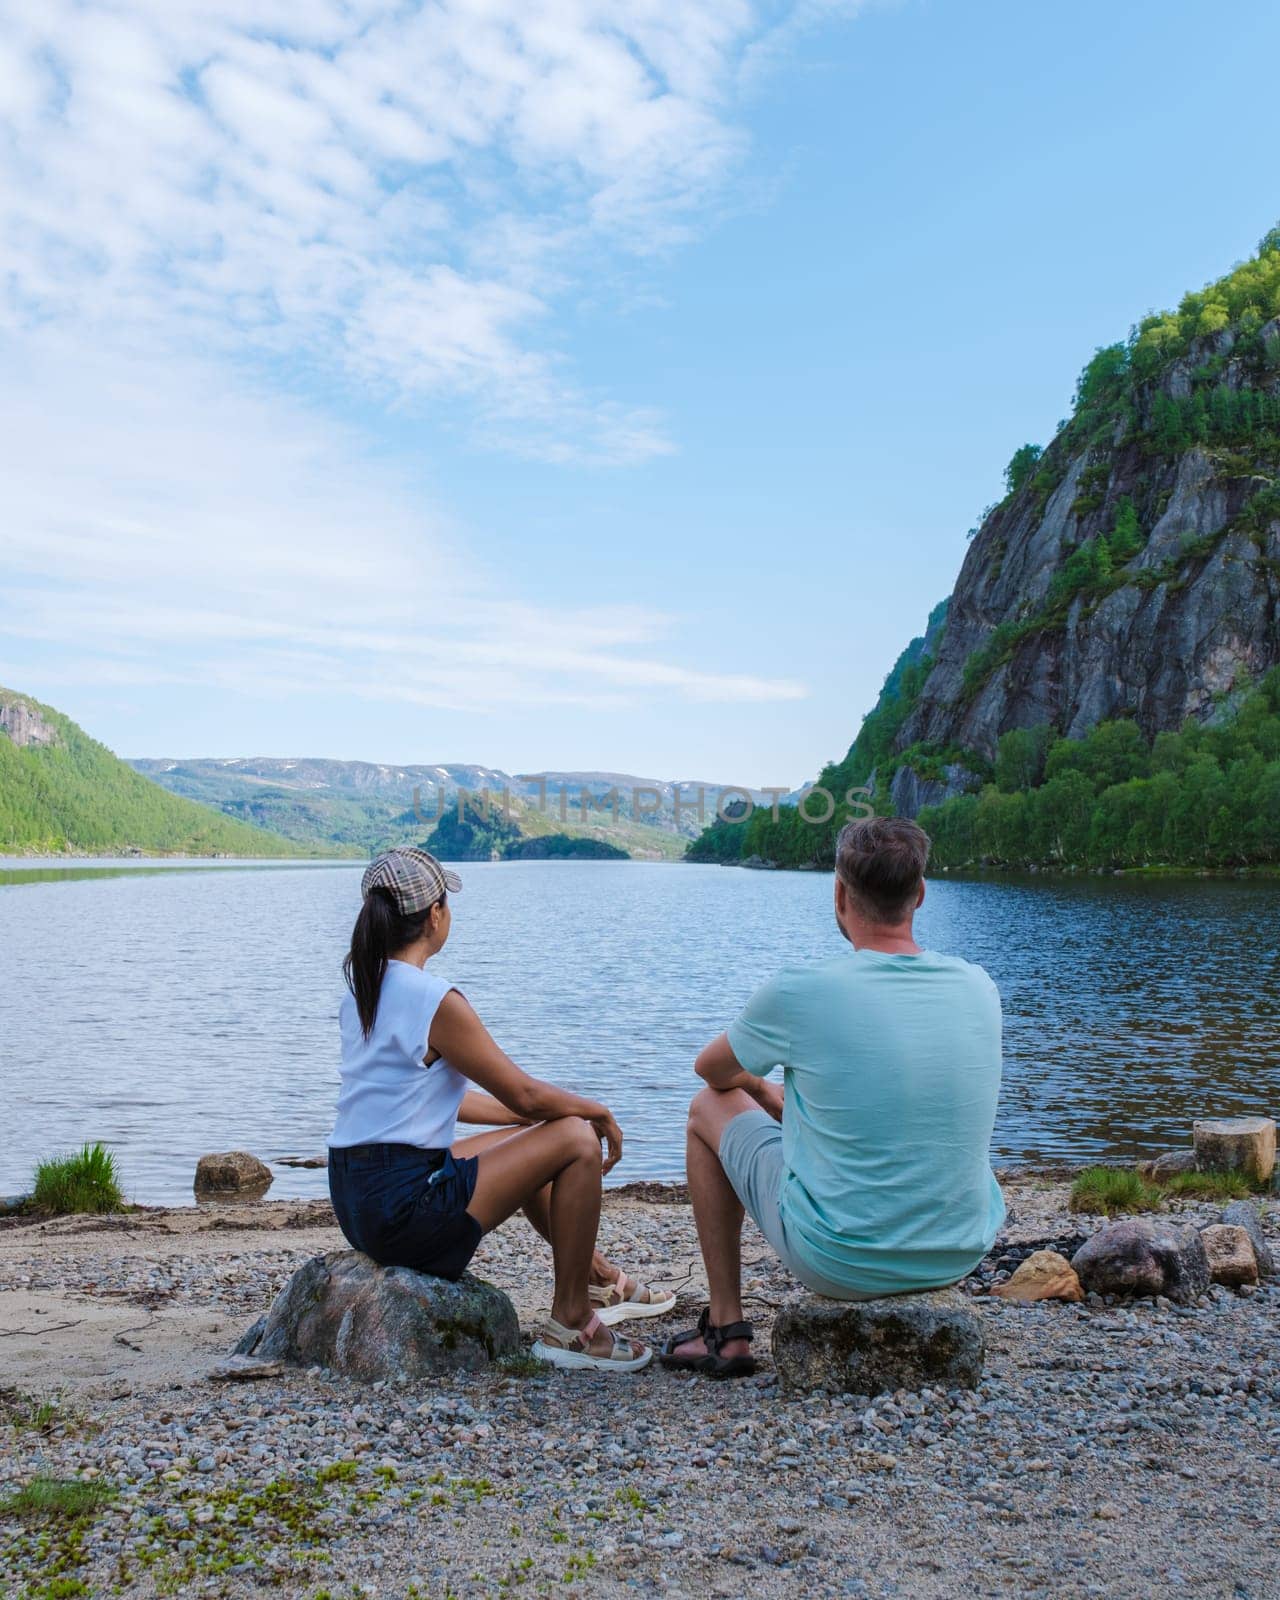 A couple sits on rocks by a tranquil lake in Norway, enjoying the breathtaking scenery and quiet solitude.